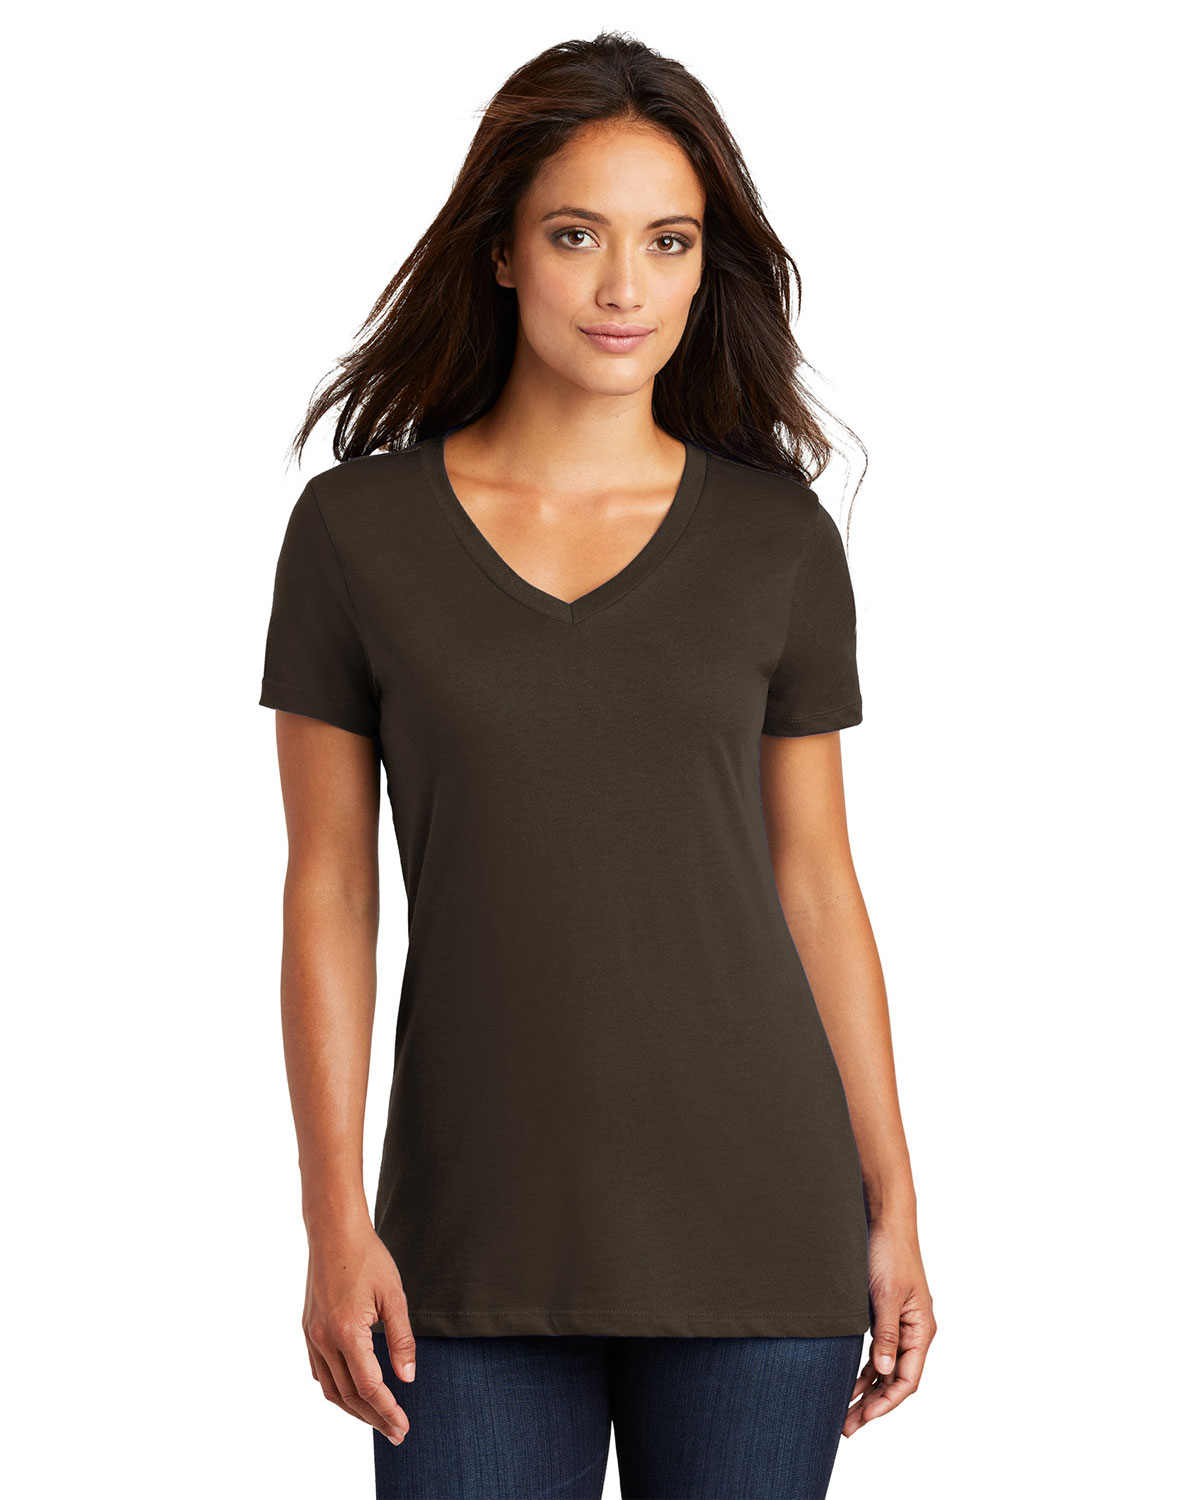 District Made DM1170L Women Perfect Weight V-Neck Tee at Apparelstation